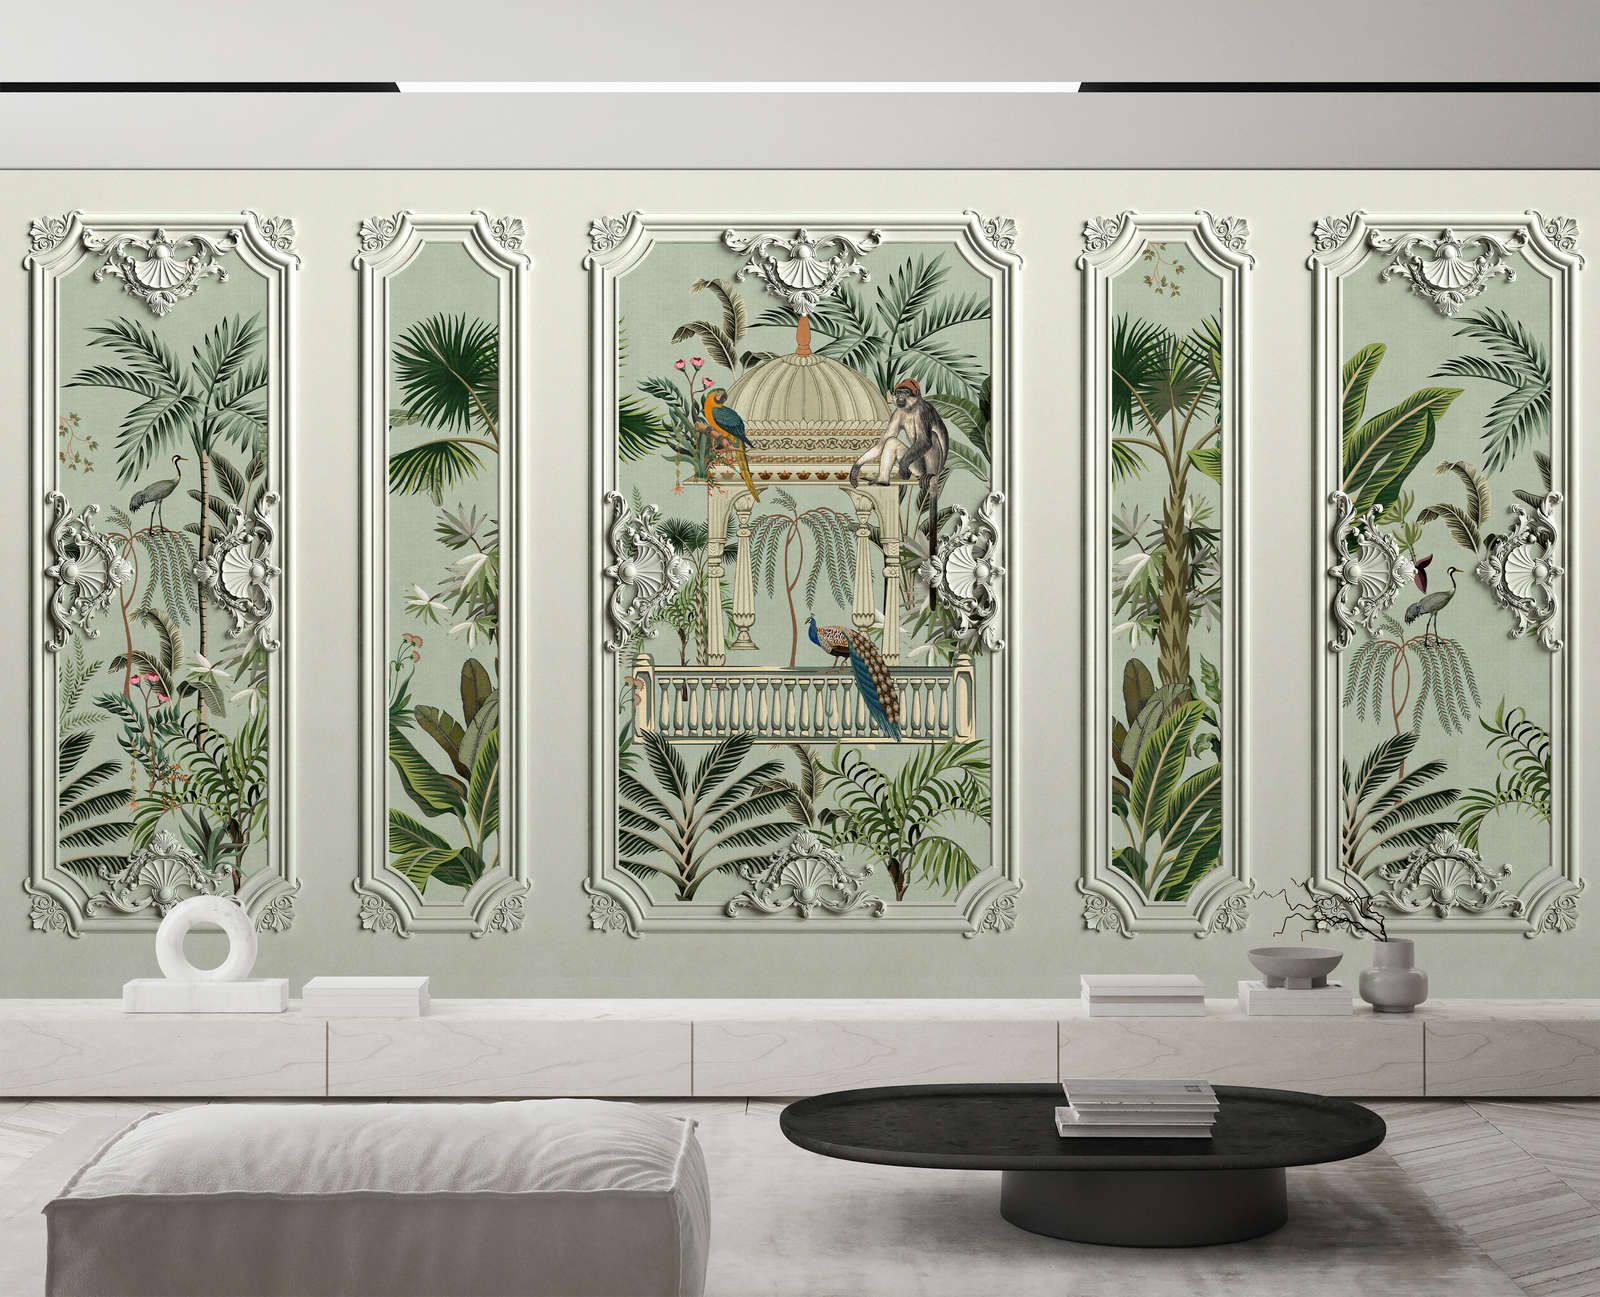             Photo wallpaper »darjeeling« - Stucco frame look with birds & palm trees with linen texture in the background - Smooth, slightly shiny premium non-woven fabric
        